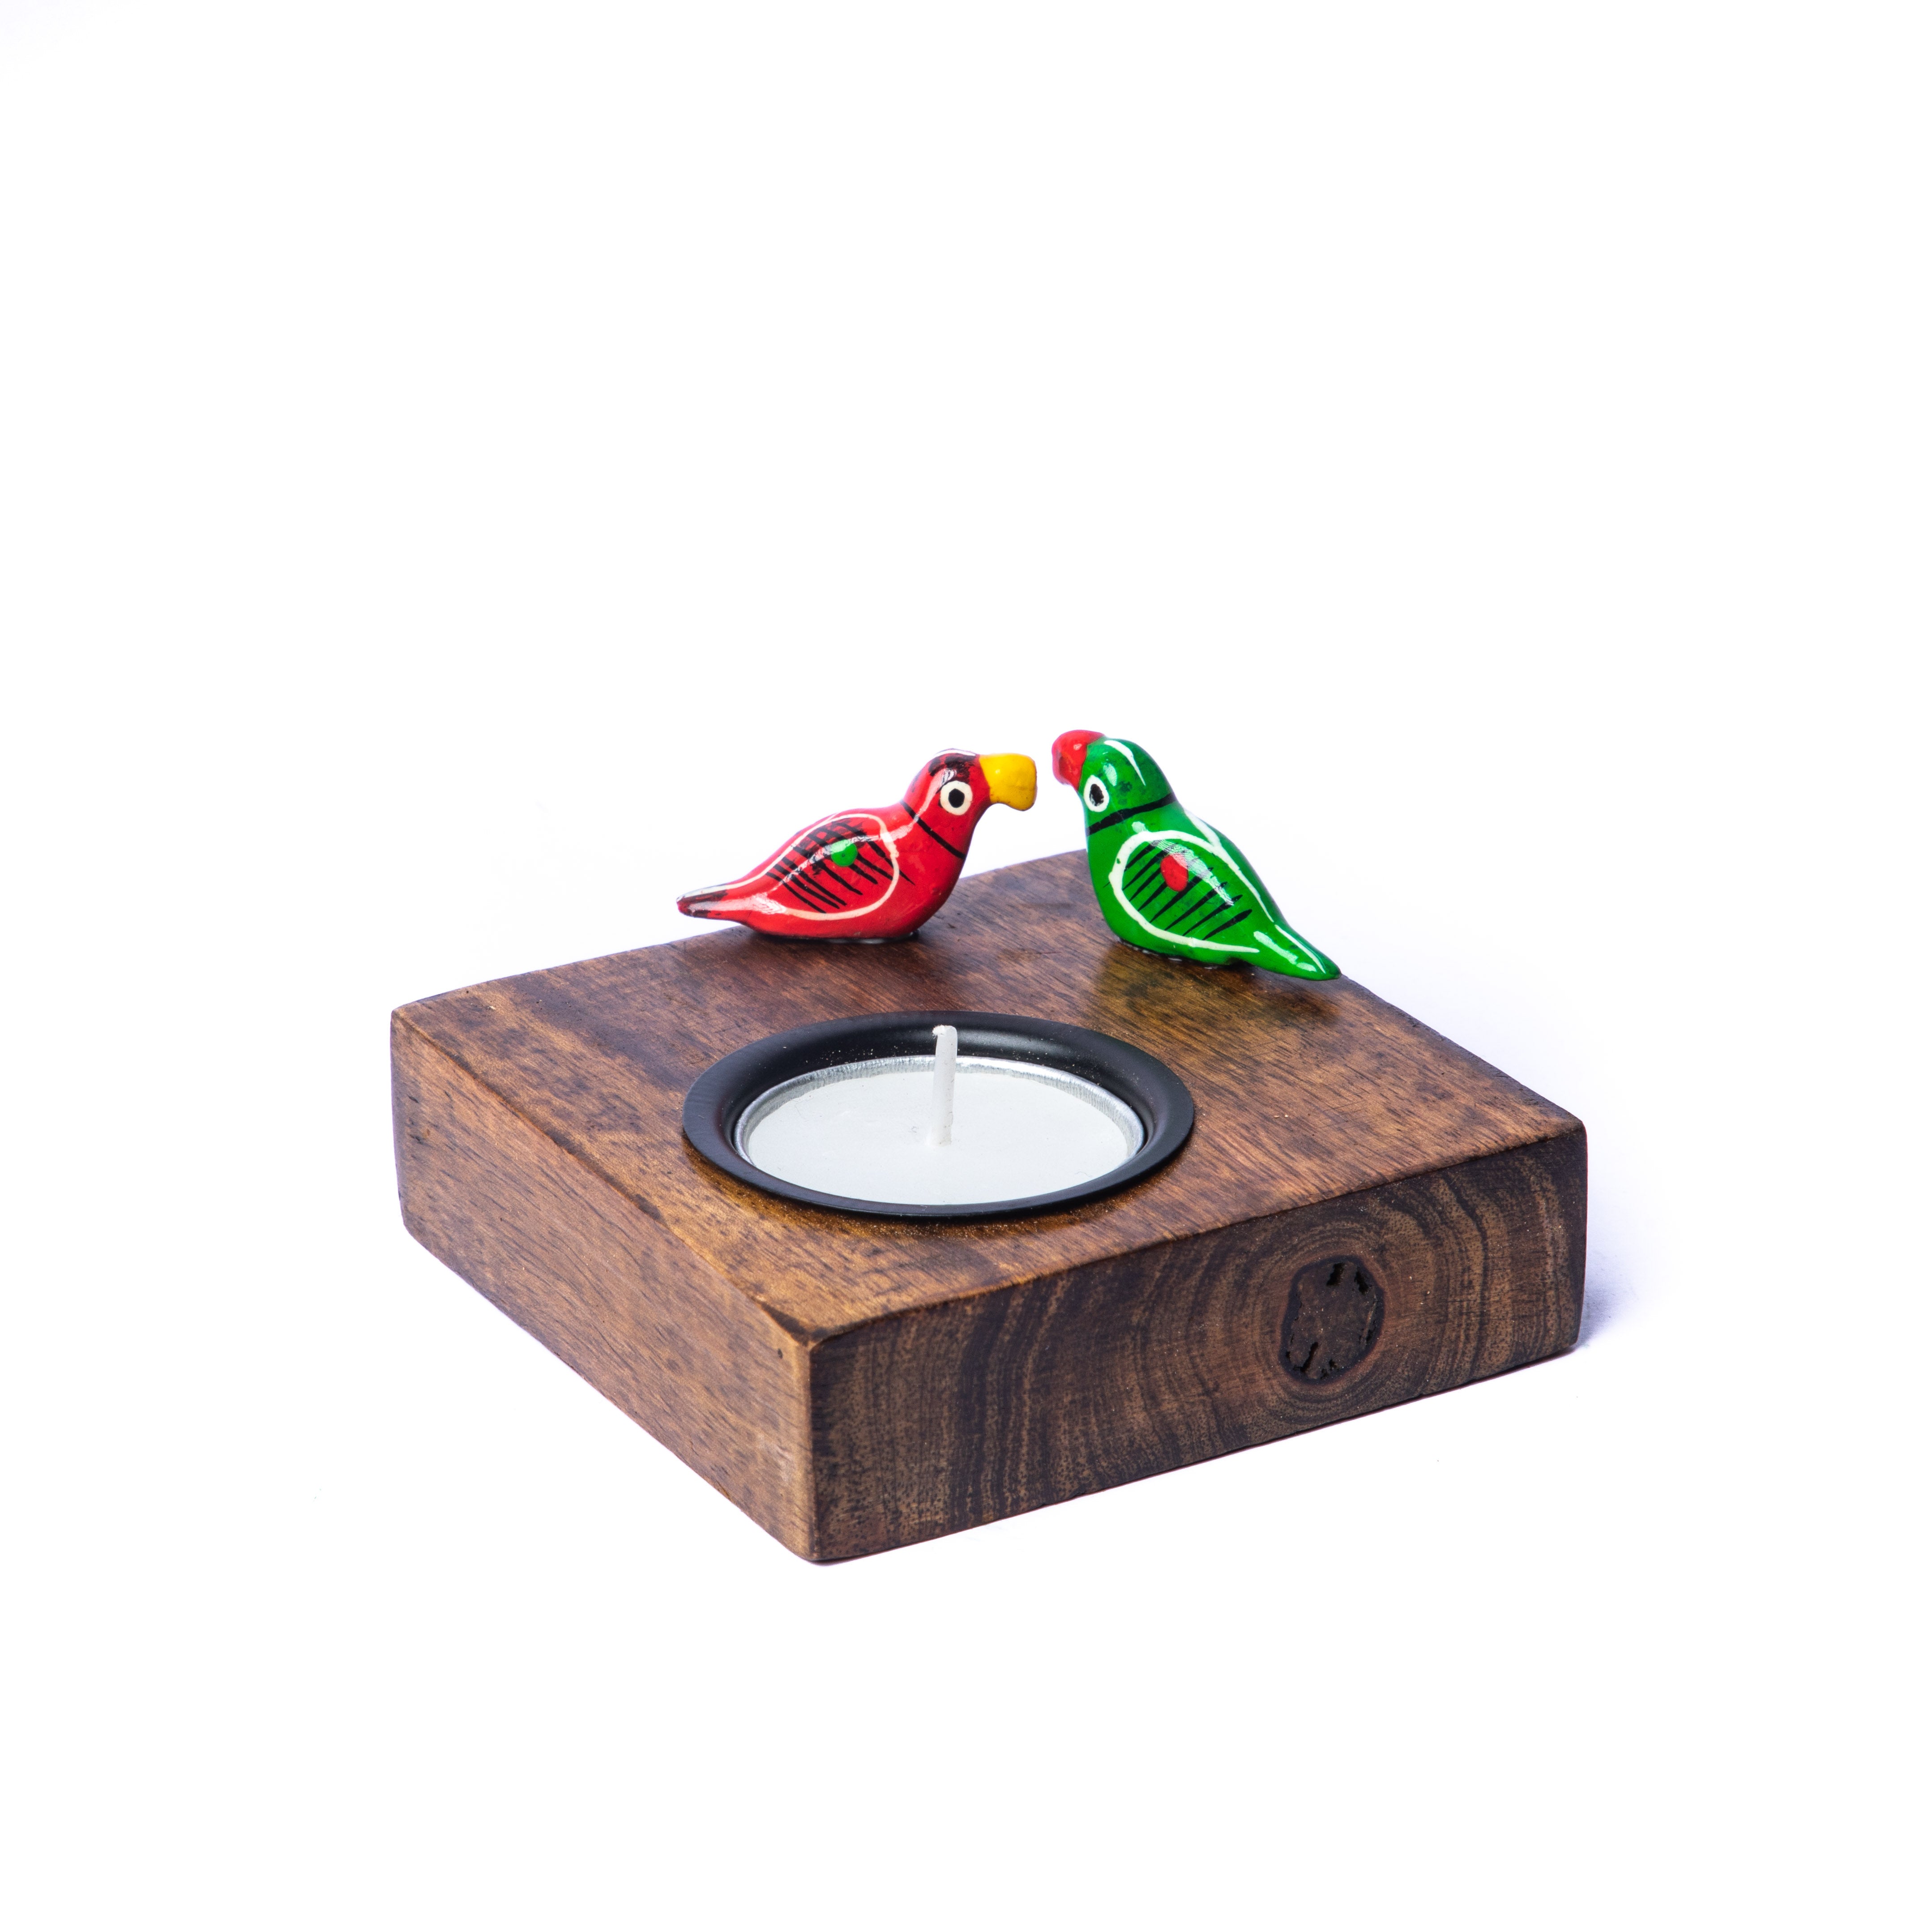 Wood crafted Tealight holder for home/office/reception decor